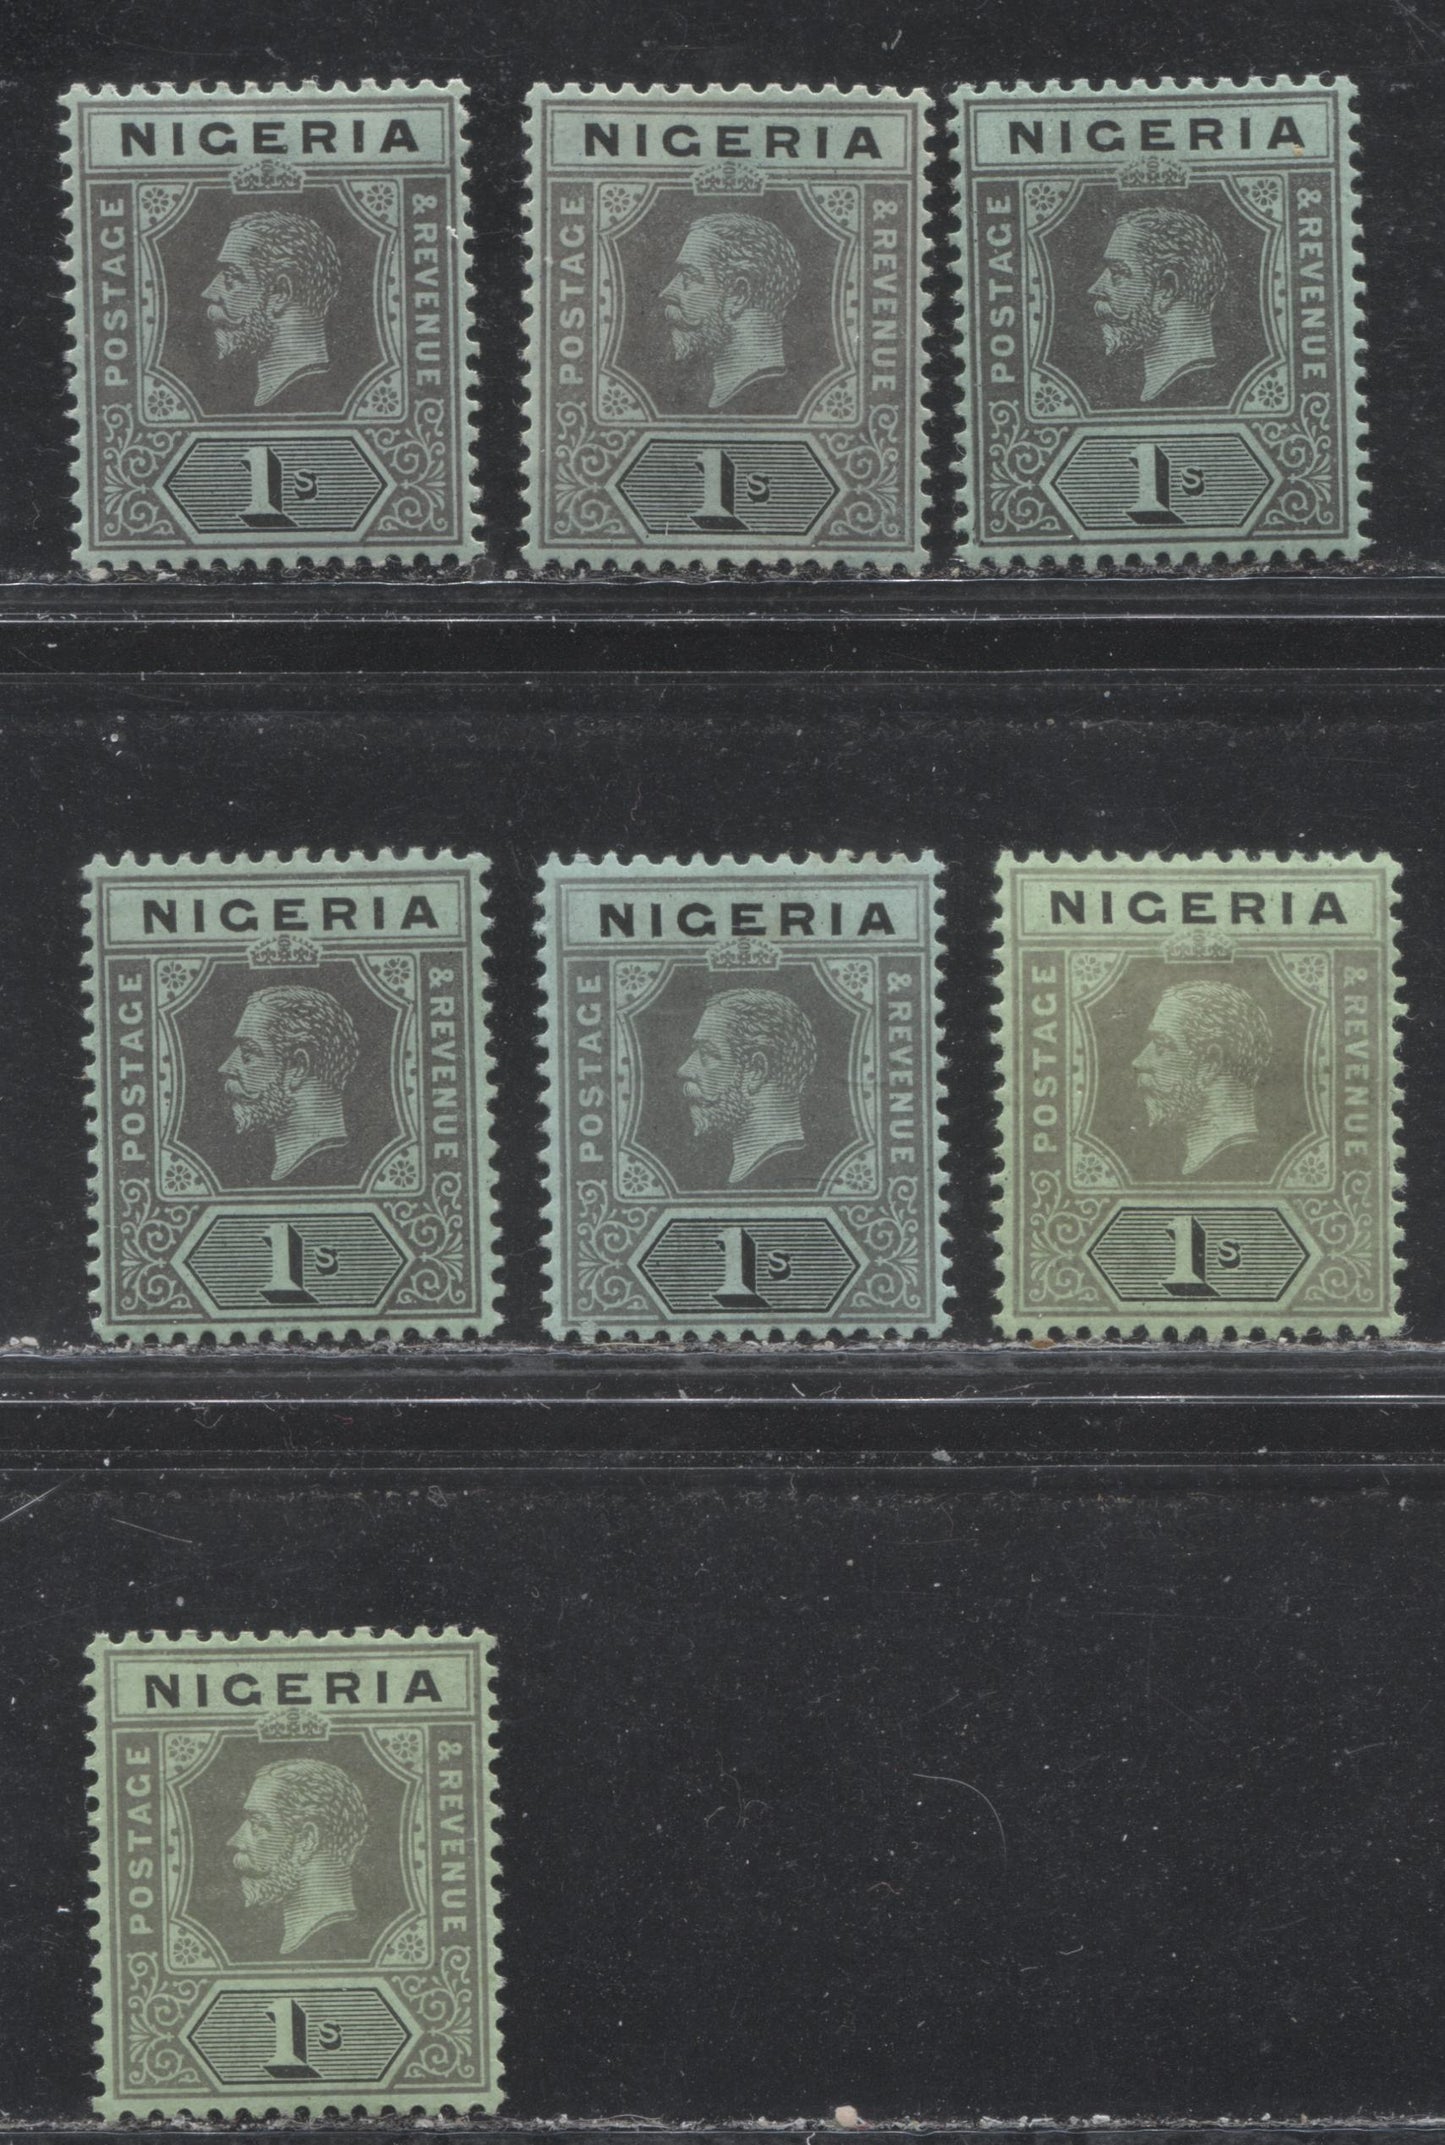 Lot 207 Nigeria SG# 8, 8c, 8f 1/- Grey & Black and Grey Black & Black on Blue Green With White, Blue Green and Emerald Backs King George V, 1914-1921 Multiple Crown CA Imperium Keyplate Issue, Seven VFOG Examples, From Different Printings